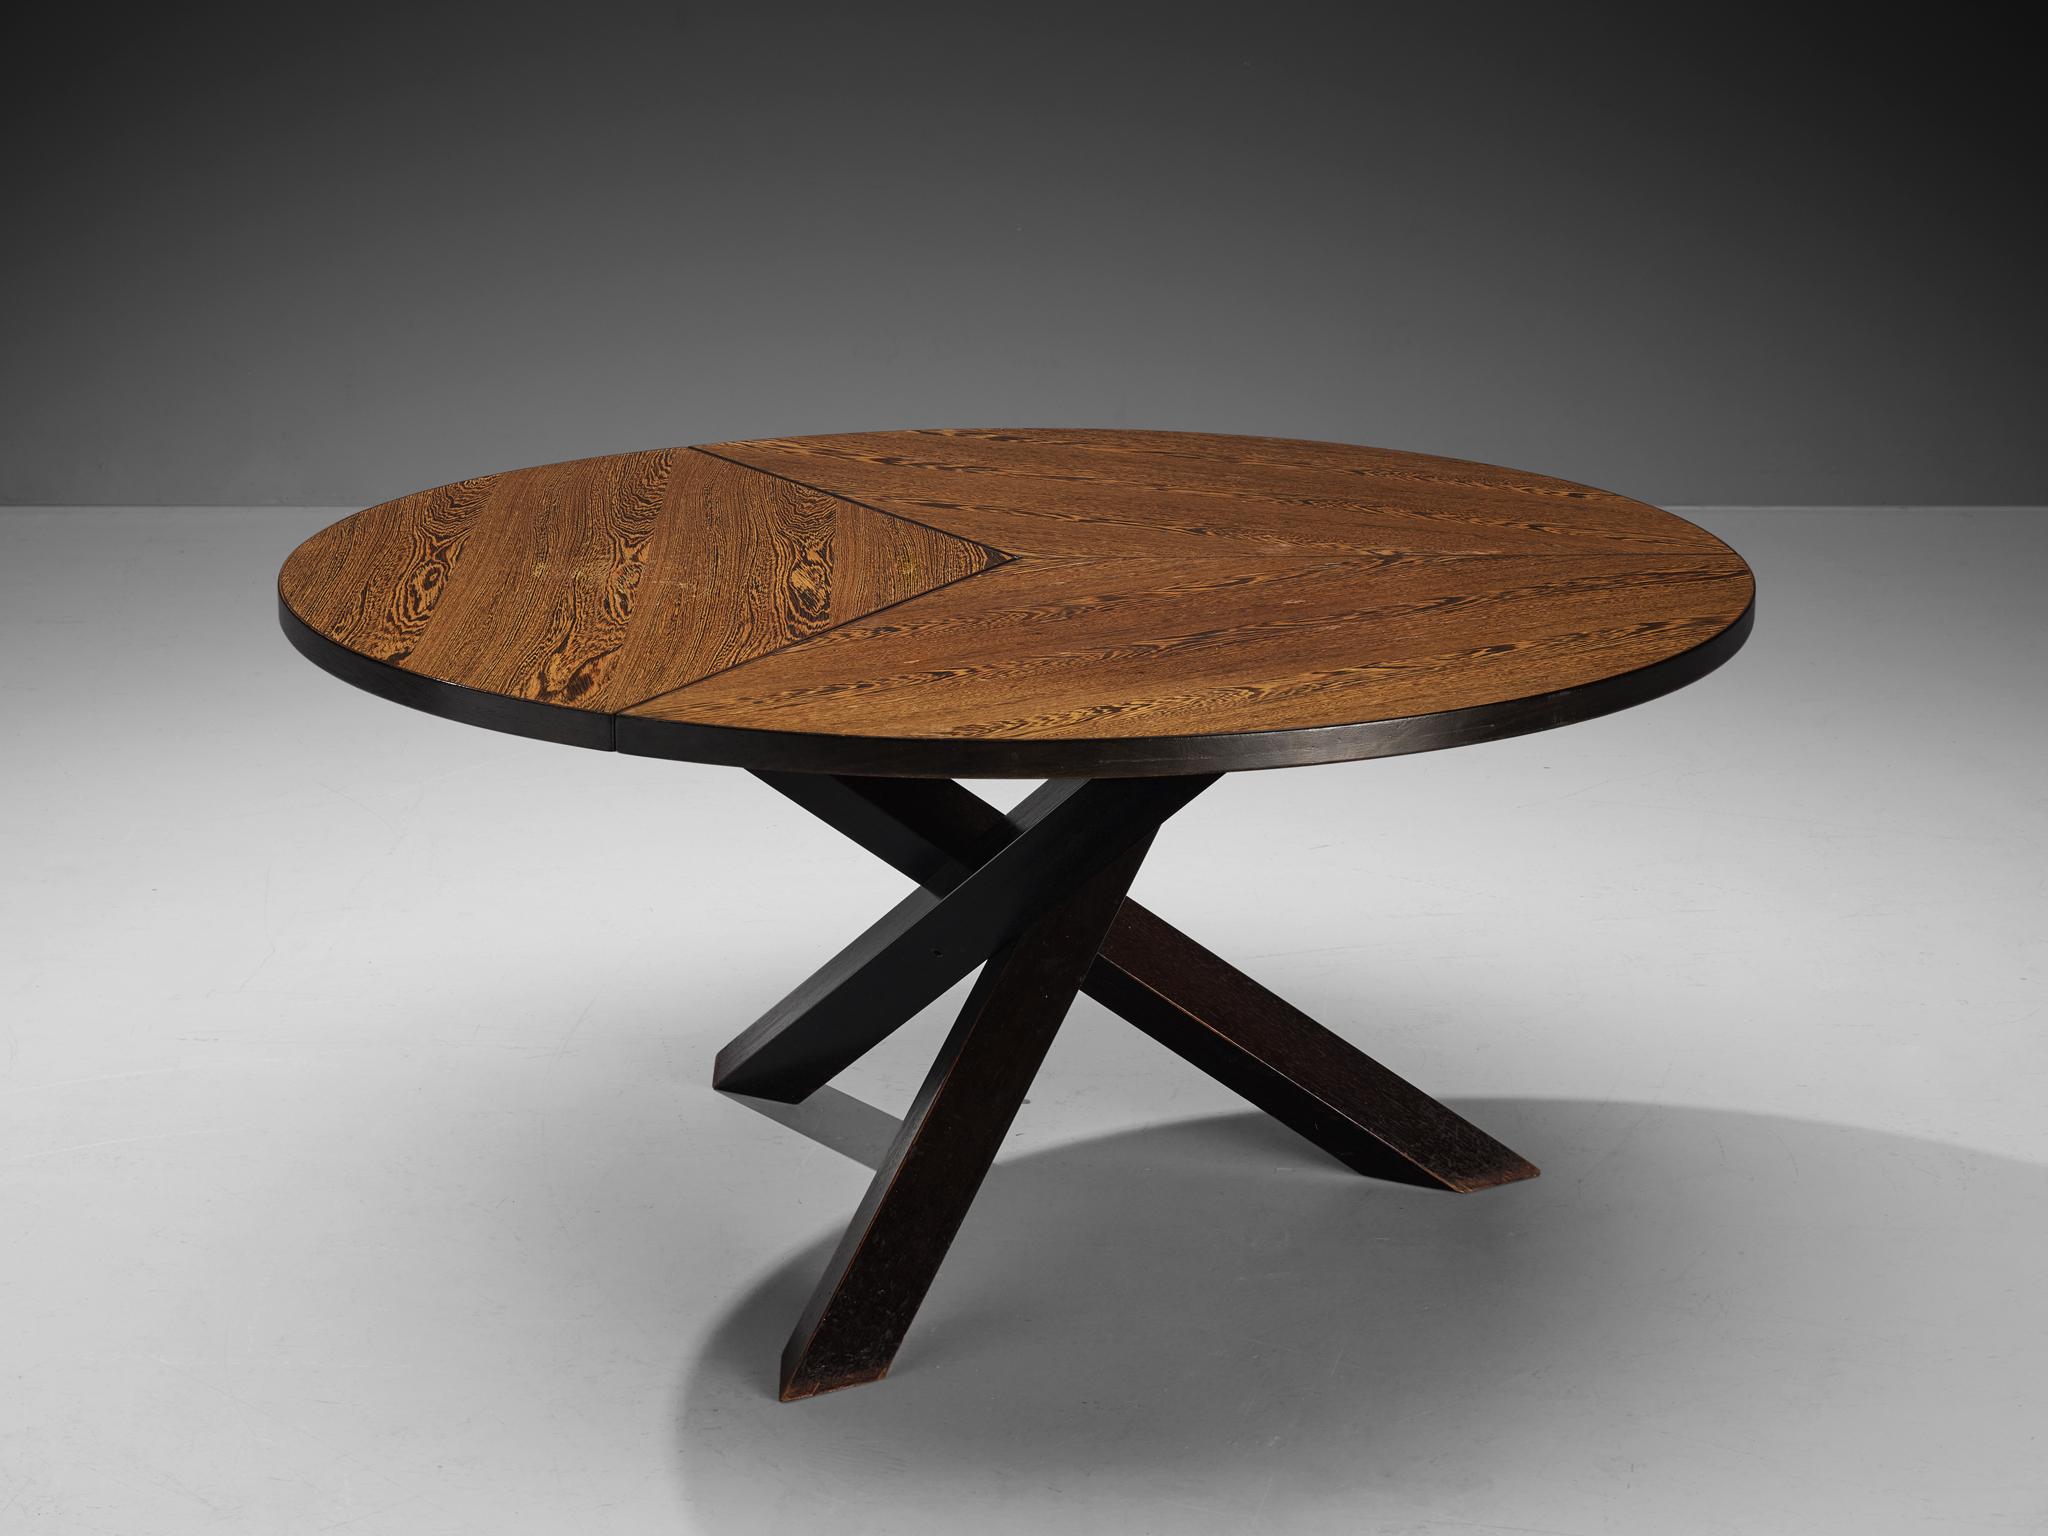 Martin Visser for 't Spectrum, dining table, wengé, stained wood, The Netherlands, 1960s

Beautiful wengé dining table designed by Martin Visser in the 1960s. With its round top, divided into three parts. The exceptional base is build from three